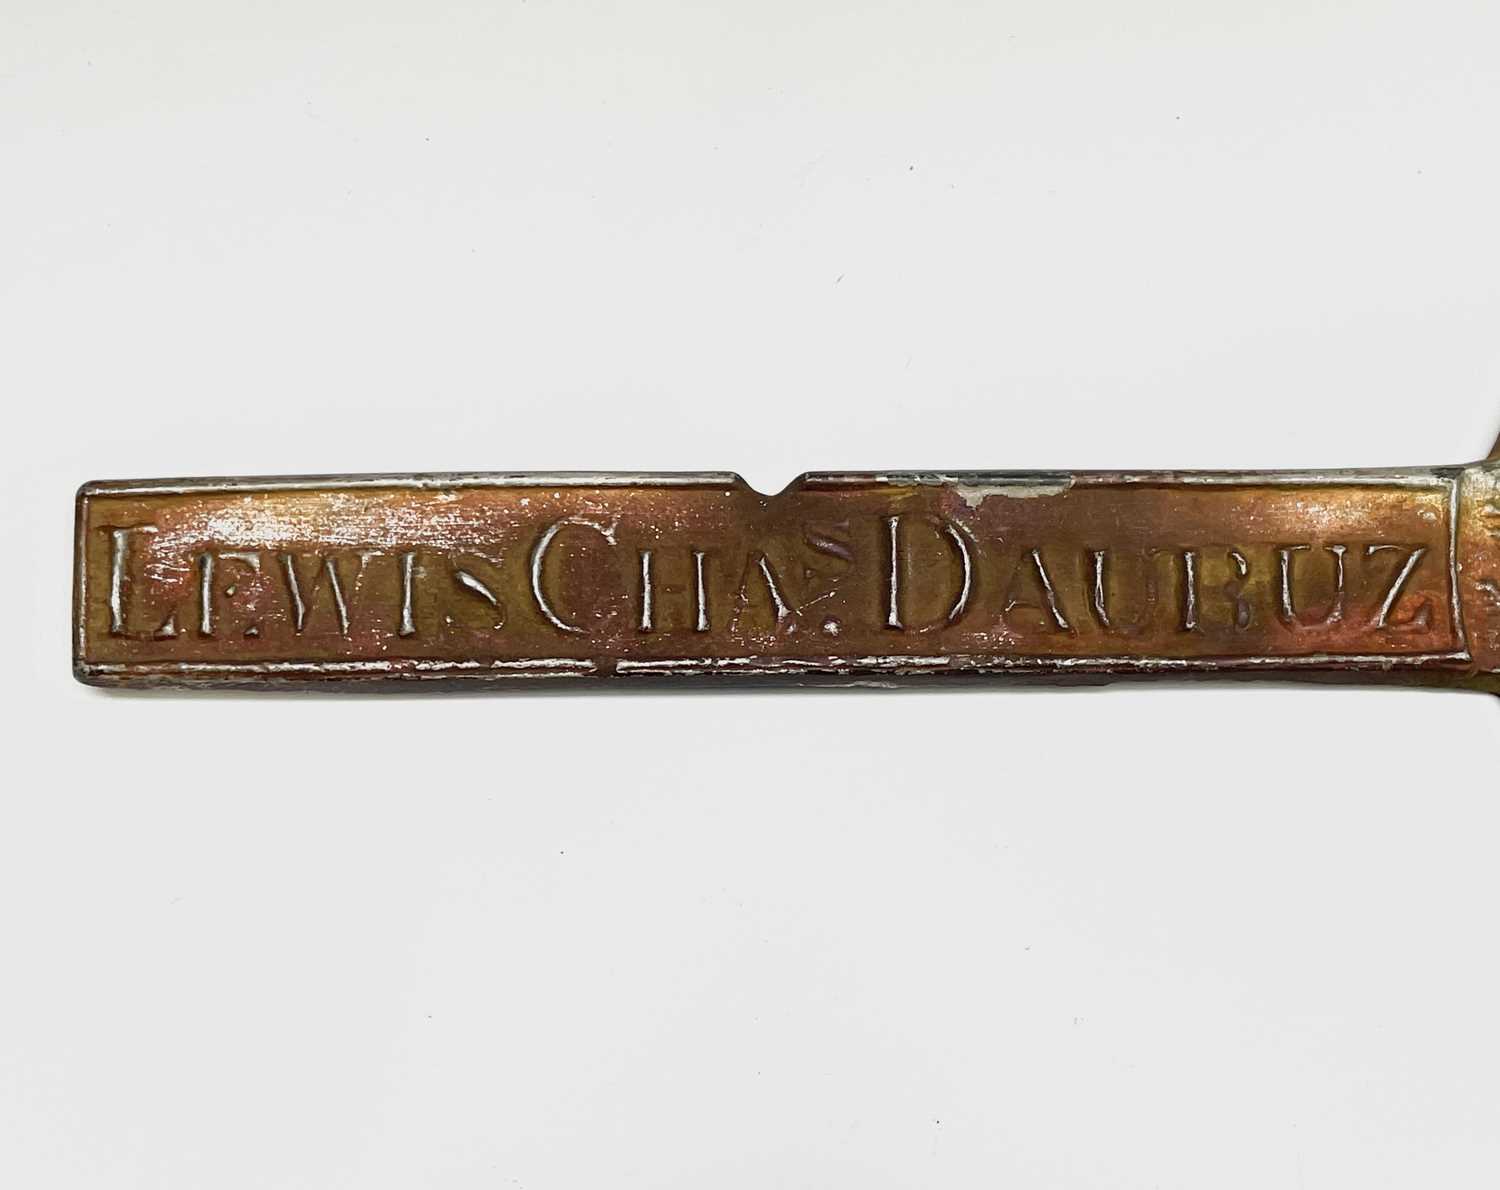 A tin strap ingot reproduced from an old mould, bearing inscription 'Lewis Chas. Daubuz Truro' and a - Image 4 of 5